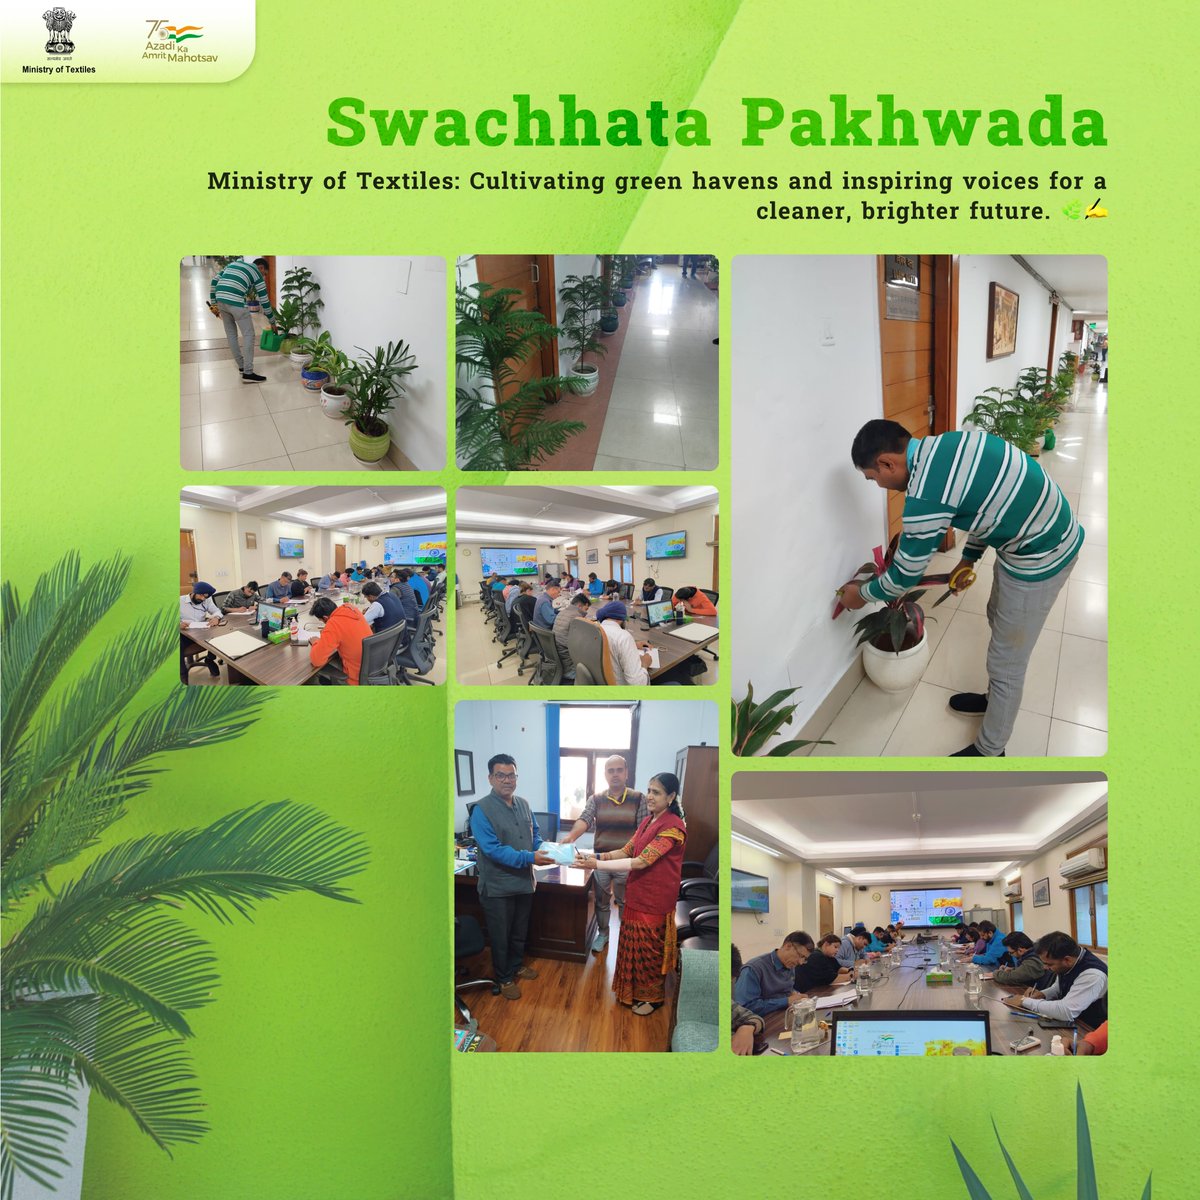 During Swachhata Pakhwada, the Ministry of Textiles adorned Udyog Bhawan with plants and pots, enhancing the aesthetics of surroundings. Additionally, a special essay competition on '2047-विकसित भारत के लिए स्वच्छता का योगदान' was organised. #SwachhataPakhwada